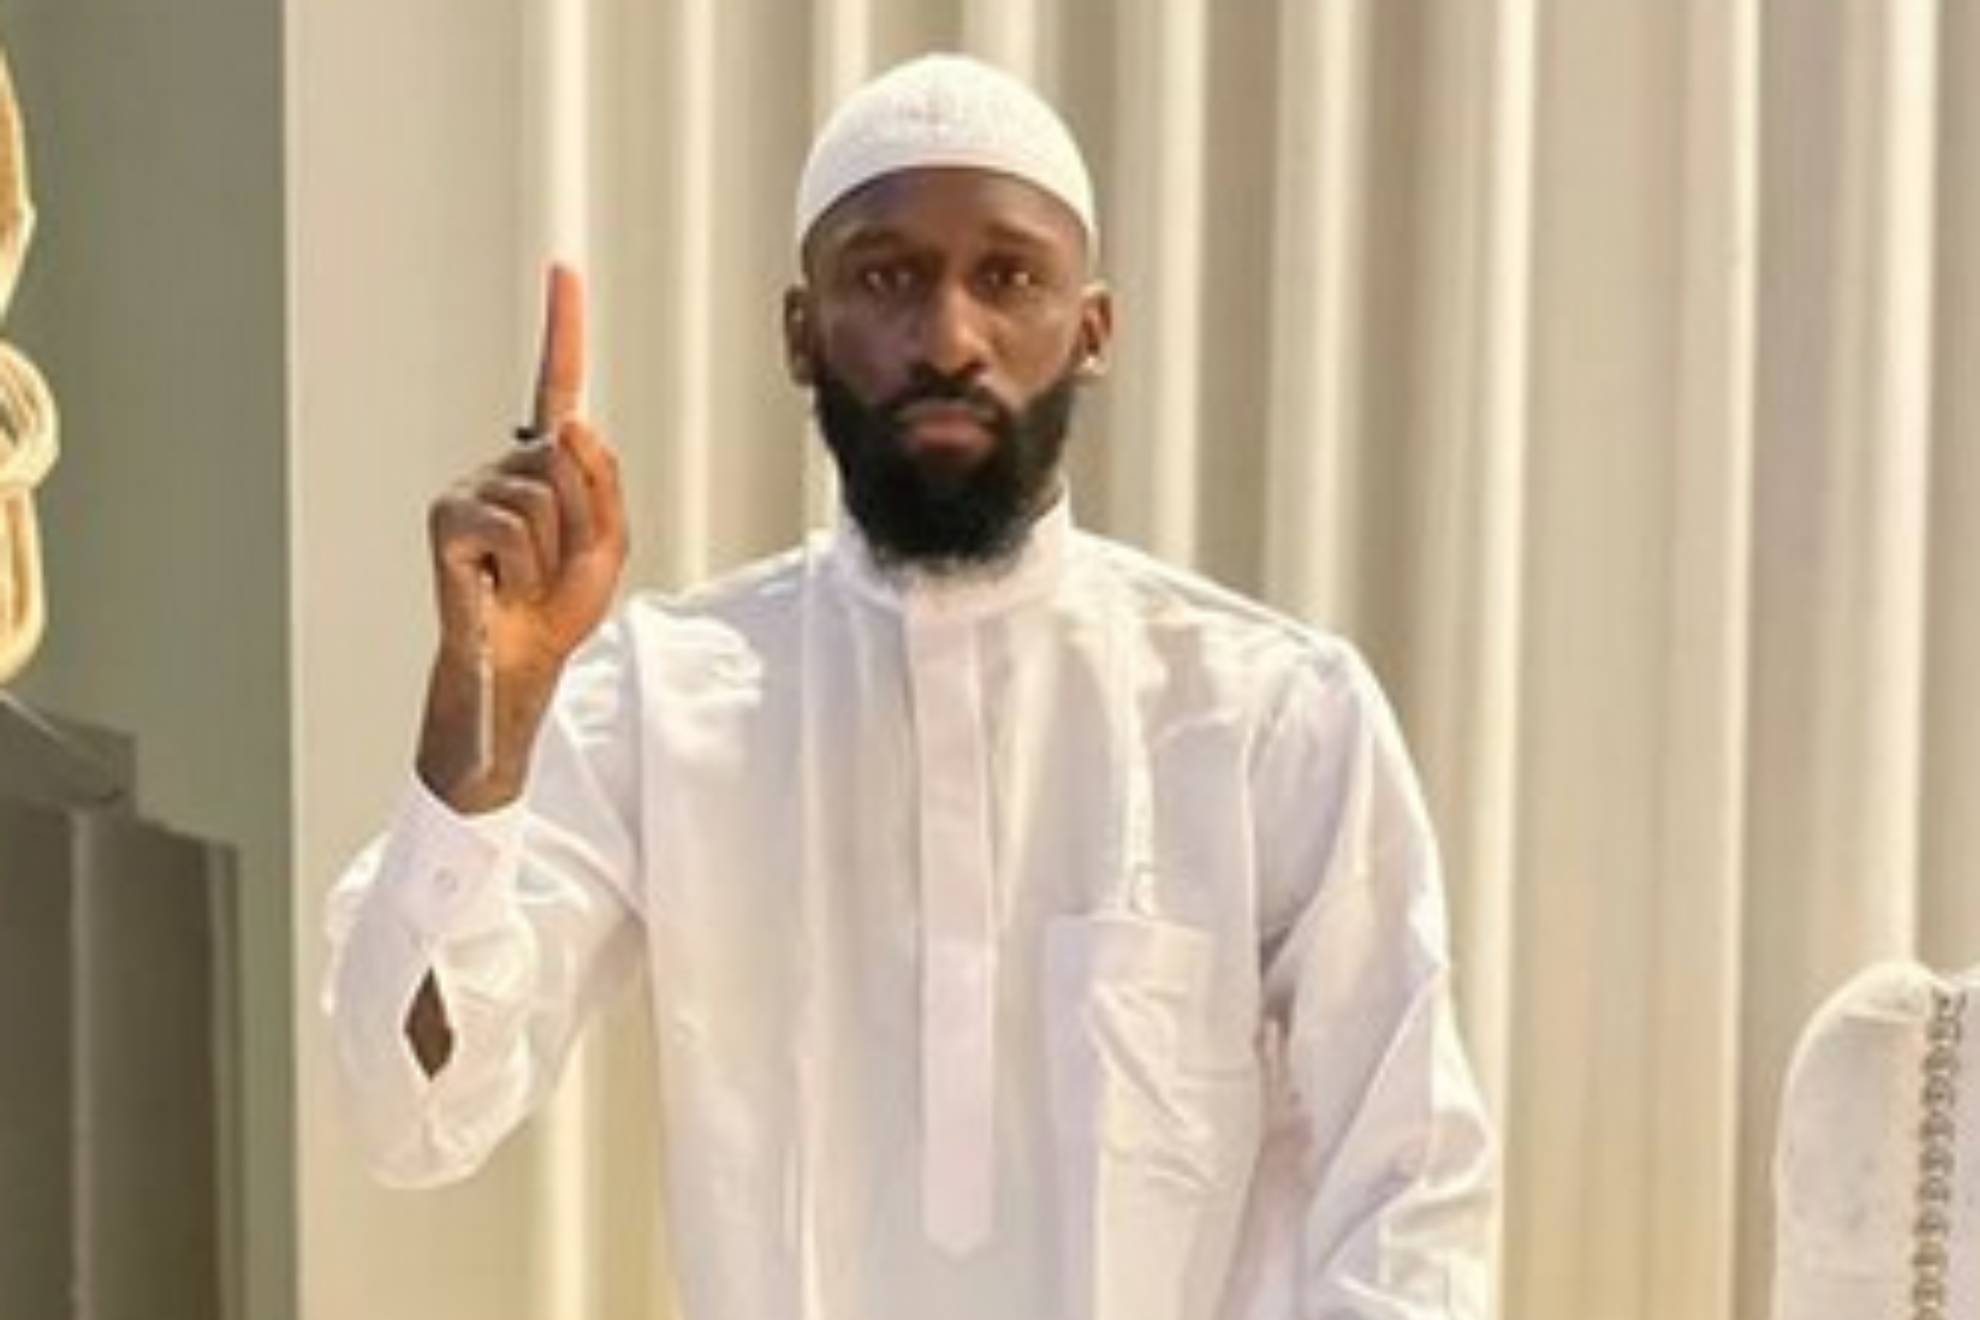 Rüdiger breaks silence after gesture linking him to ISIS: I have given third parties the opportunity to misinterpret